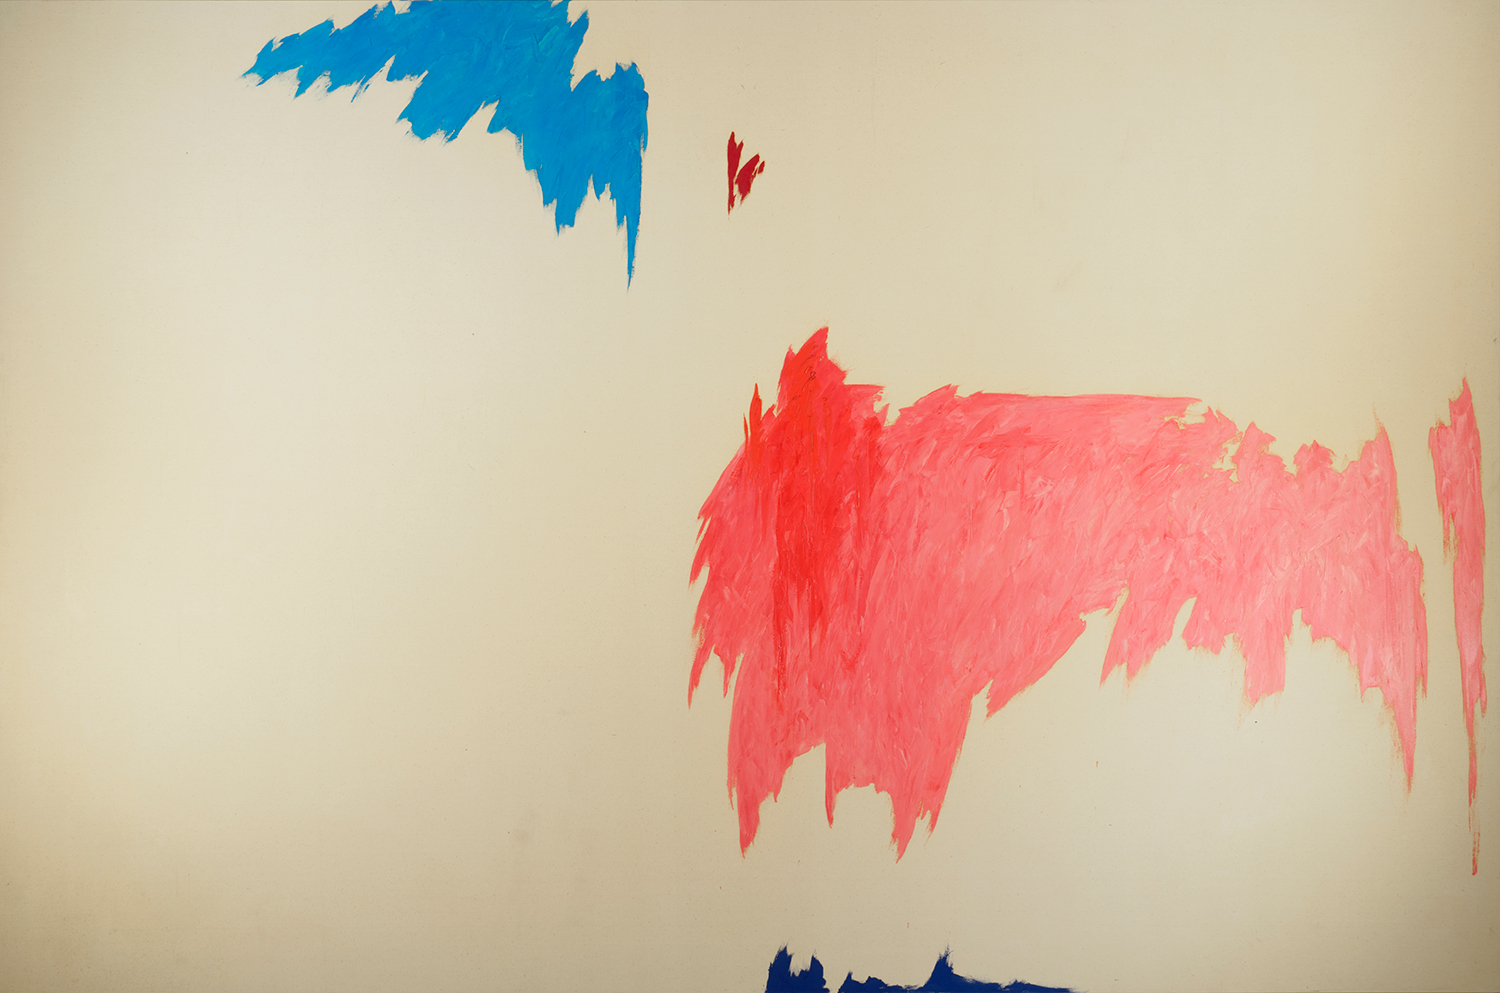 An abstract oil painting on canvas with a large splotch of pink paint, and some smaller areas with light blue, red, and dark blue